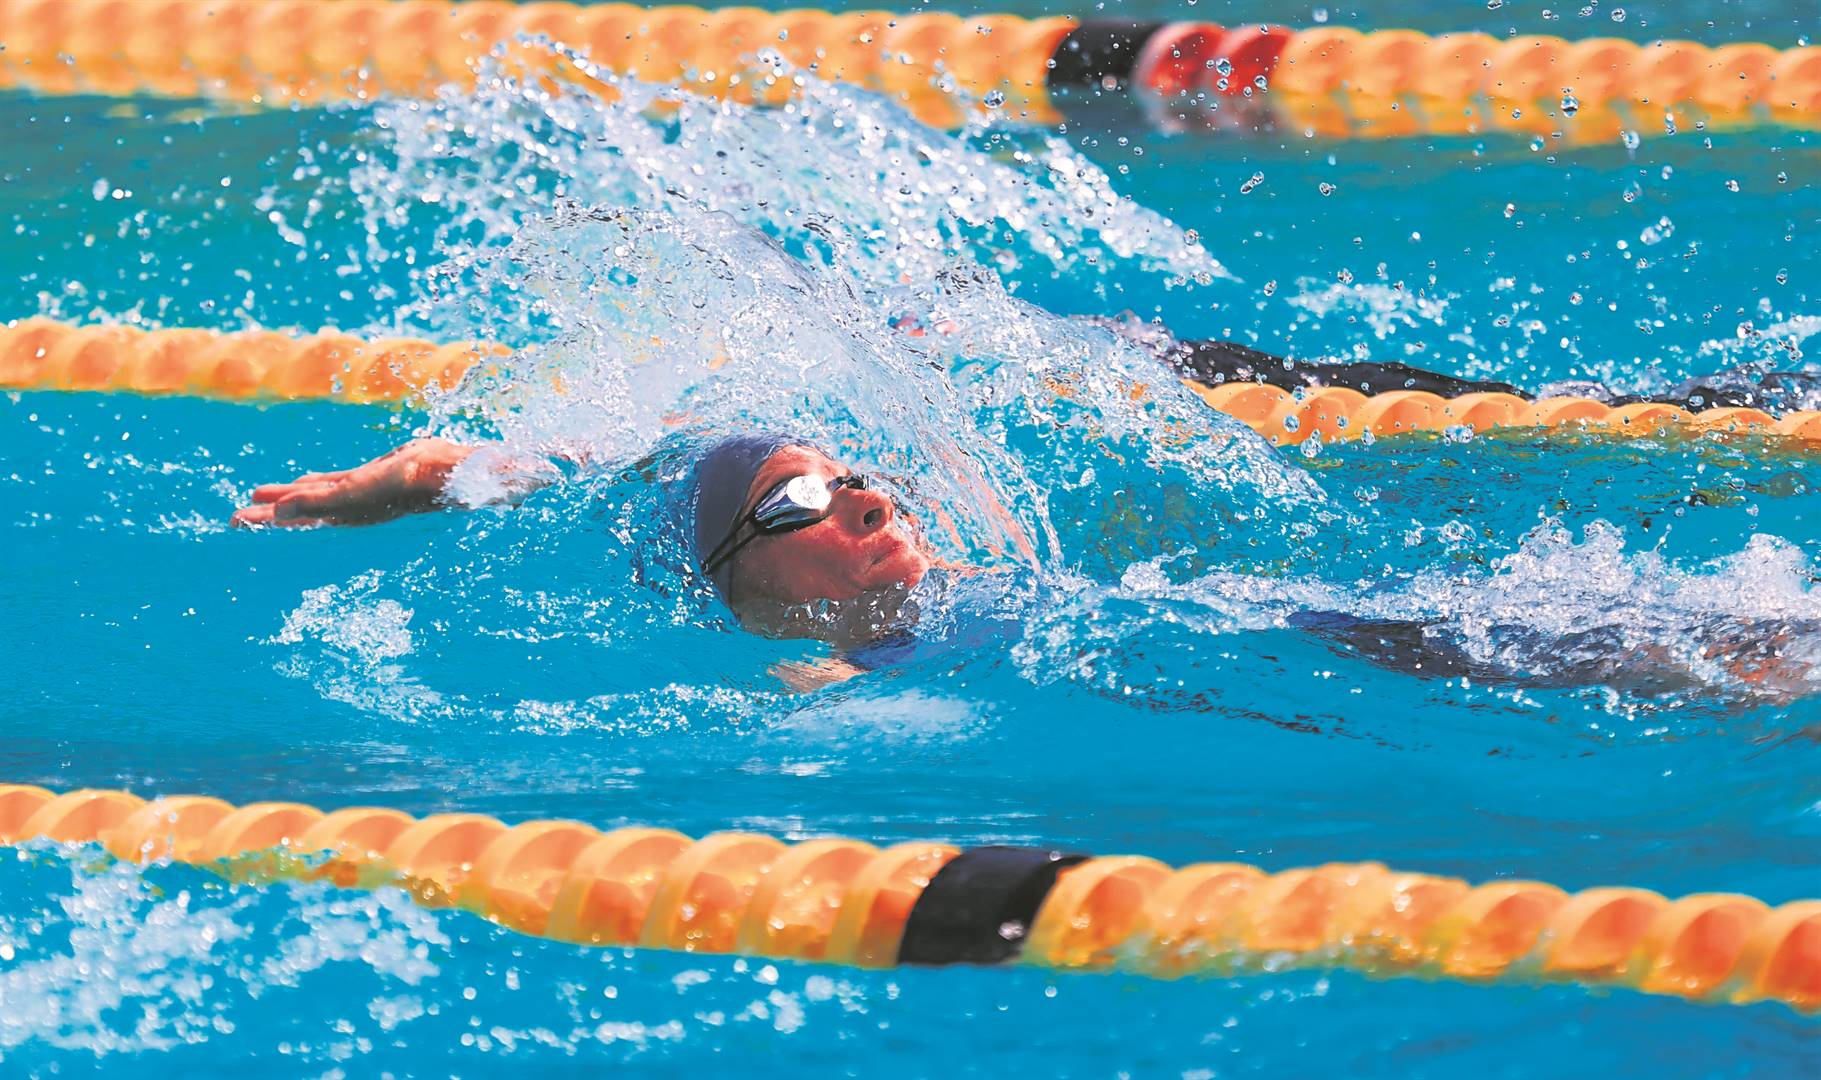 Barbara Fraatz (58), a master swimmer from Kroonstad, participated in the 39th South Africa Masters Swimming Championships that was held in March at the St. Stithians College Aquatics Centre in Sandton, Johannesburg. She competed in 14 swimming events and won five gold, four silver, and two bronze medals. Fraatz also swam the 1 km open water swim that was held at the Prime View Adventure and Leisure Resort in Olifantsfontein. She completed the swim in 18:35 and came first in 55 to 59 years age category. In the open water freestyle relay event for women, Fraatz and her team were overall first.  Photo: Supplied